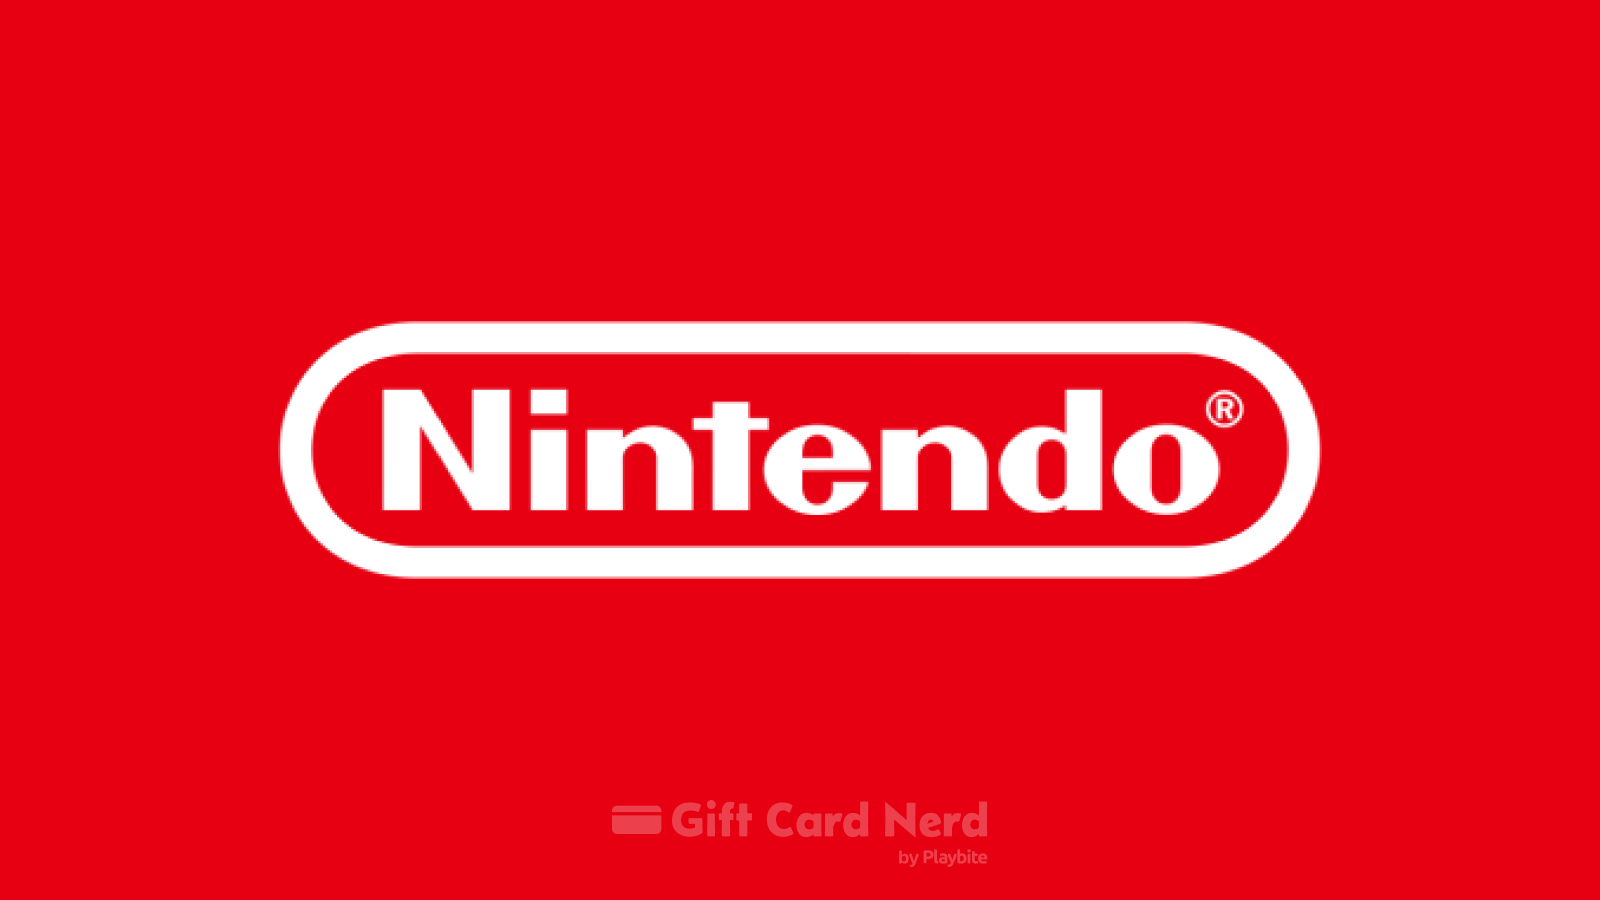 Does Walgreens sell Nintendo gift cards?